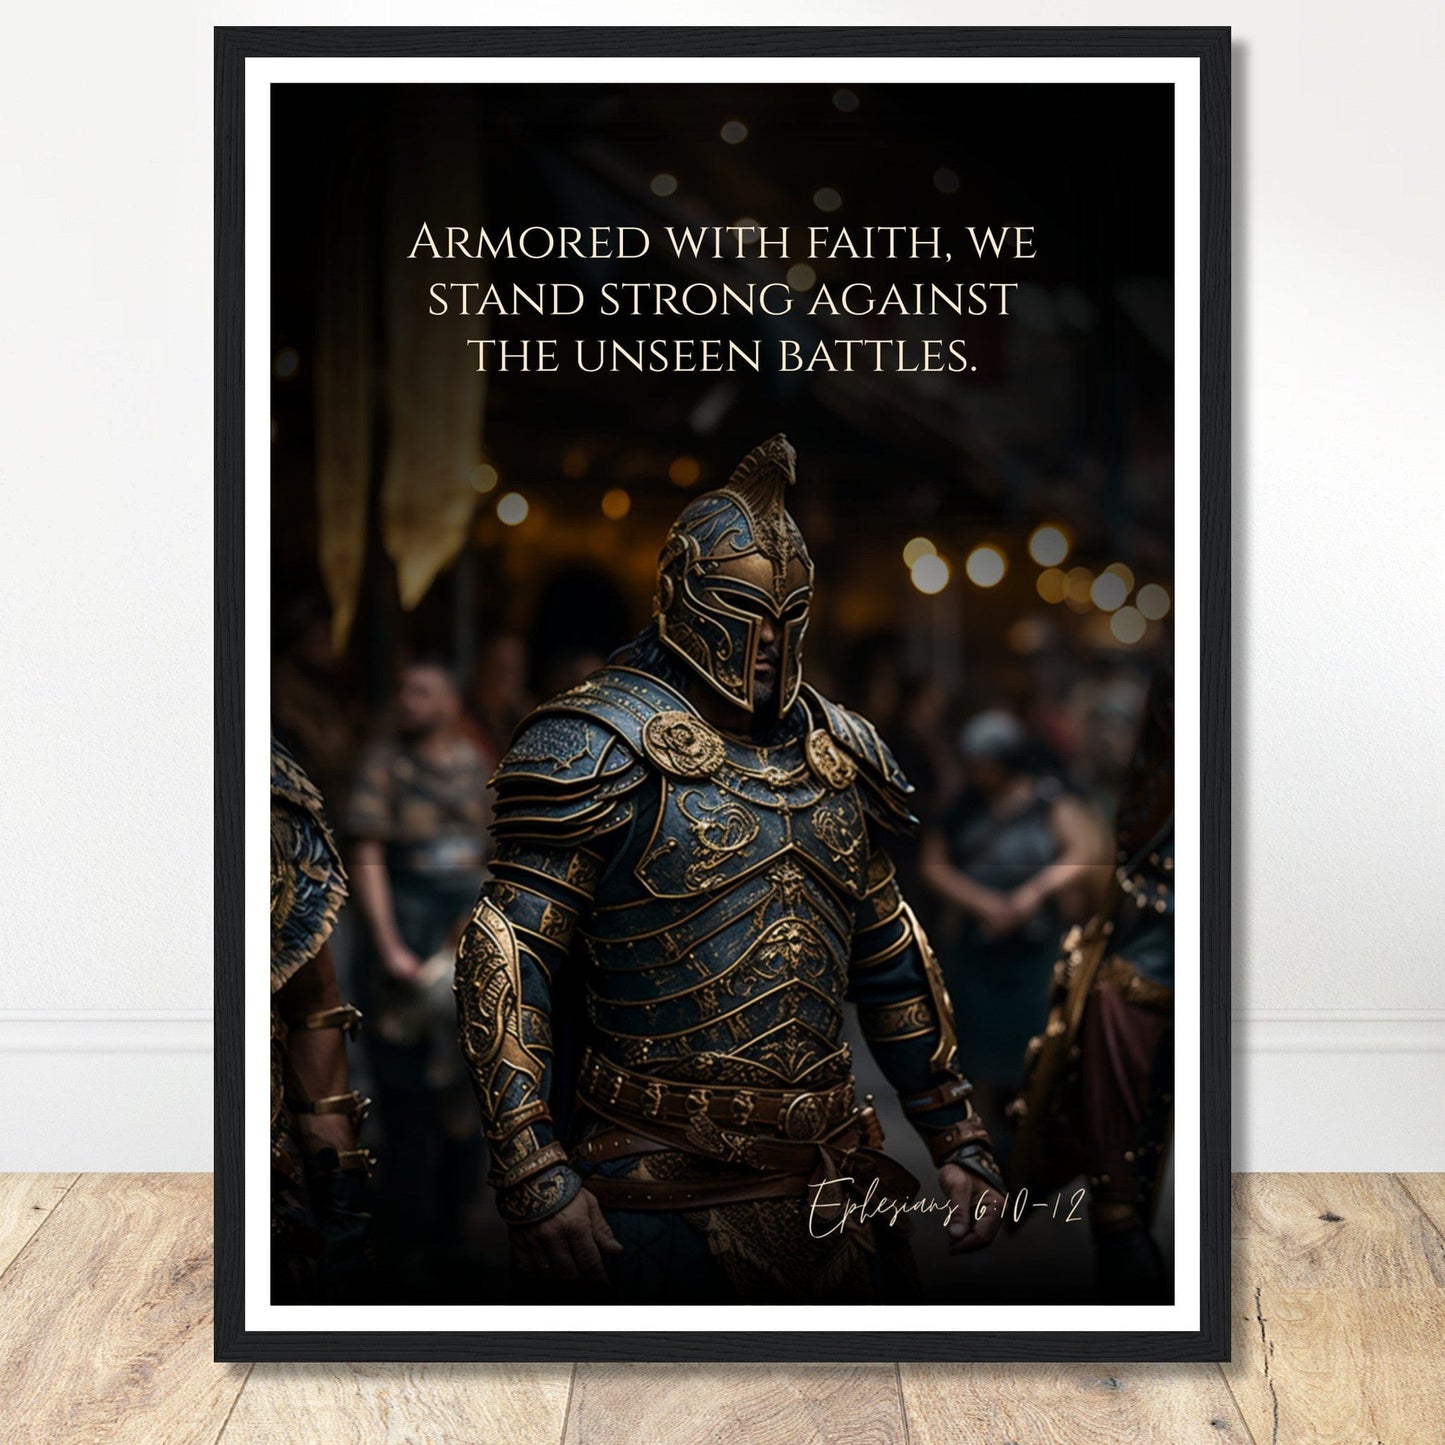 Coffee With My Father Print Material 45x60 cm / 18x24″ / Premium Matte Paper Wooden Framed Poster / Black frame The Unseen Battles: Ephesians 6:10-12 - Artwork